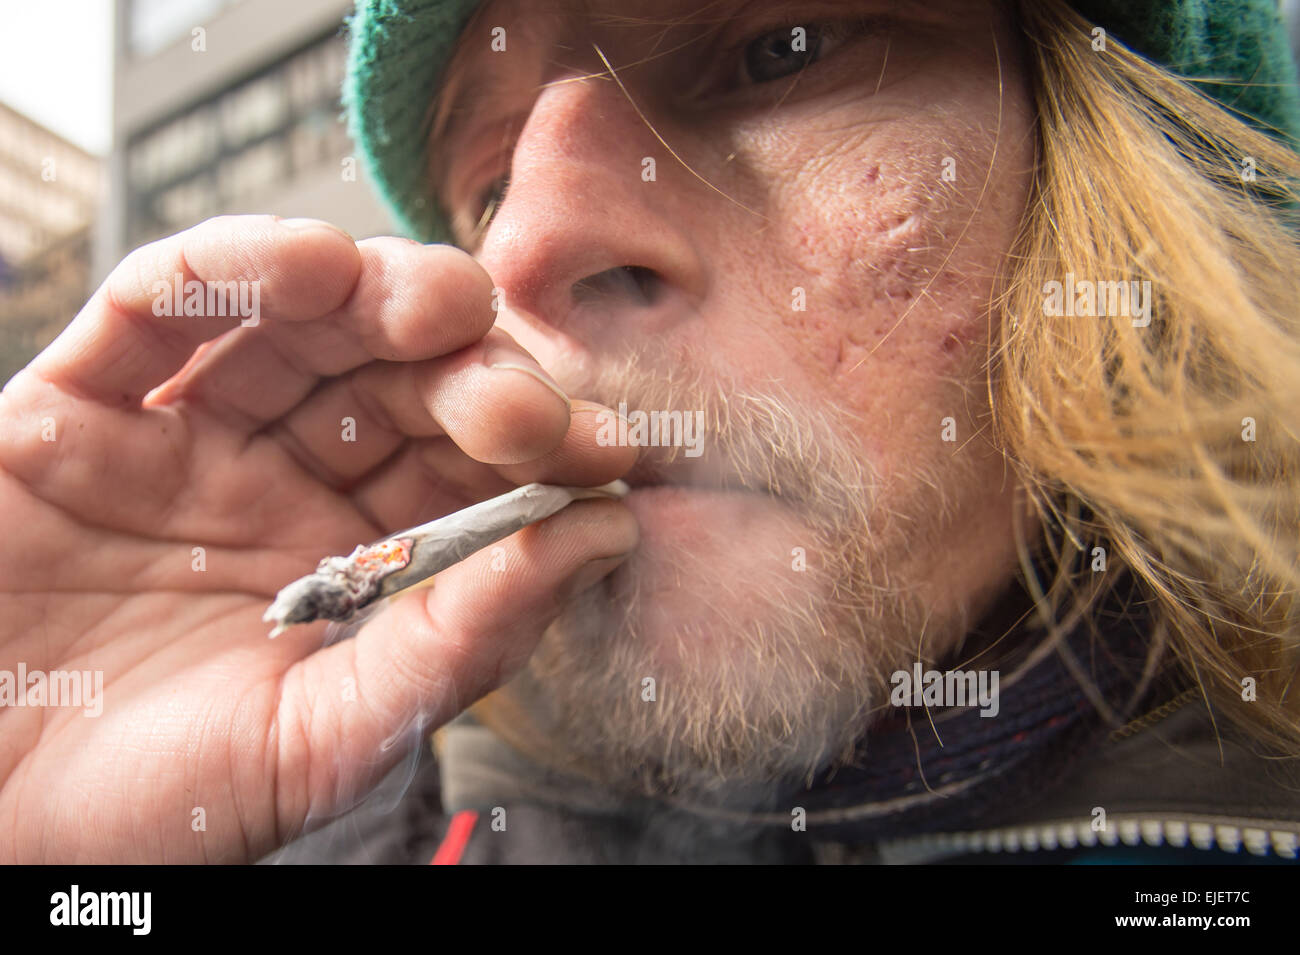 A man smoking a joint using spice, a legal high Stock Photo